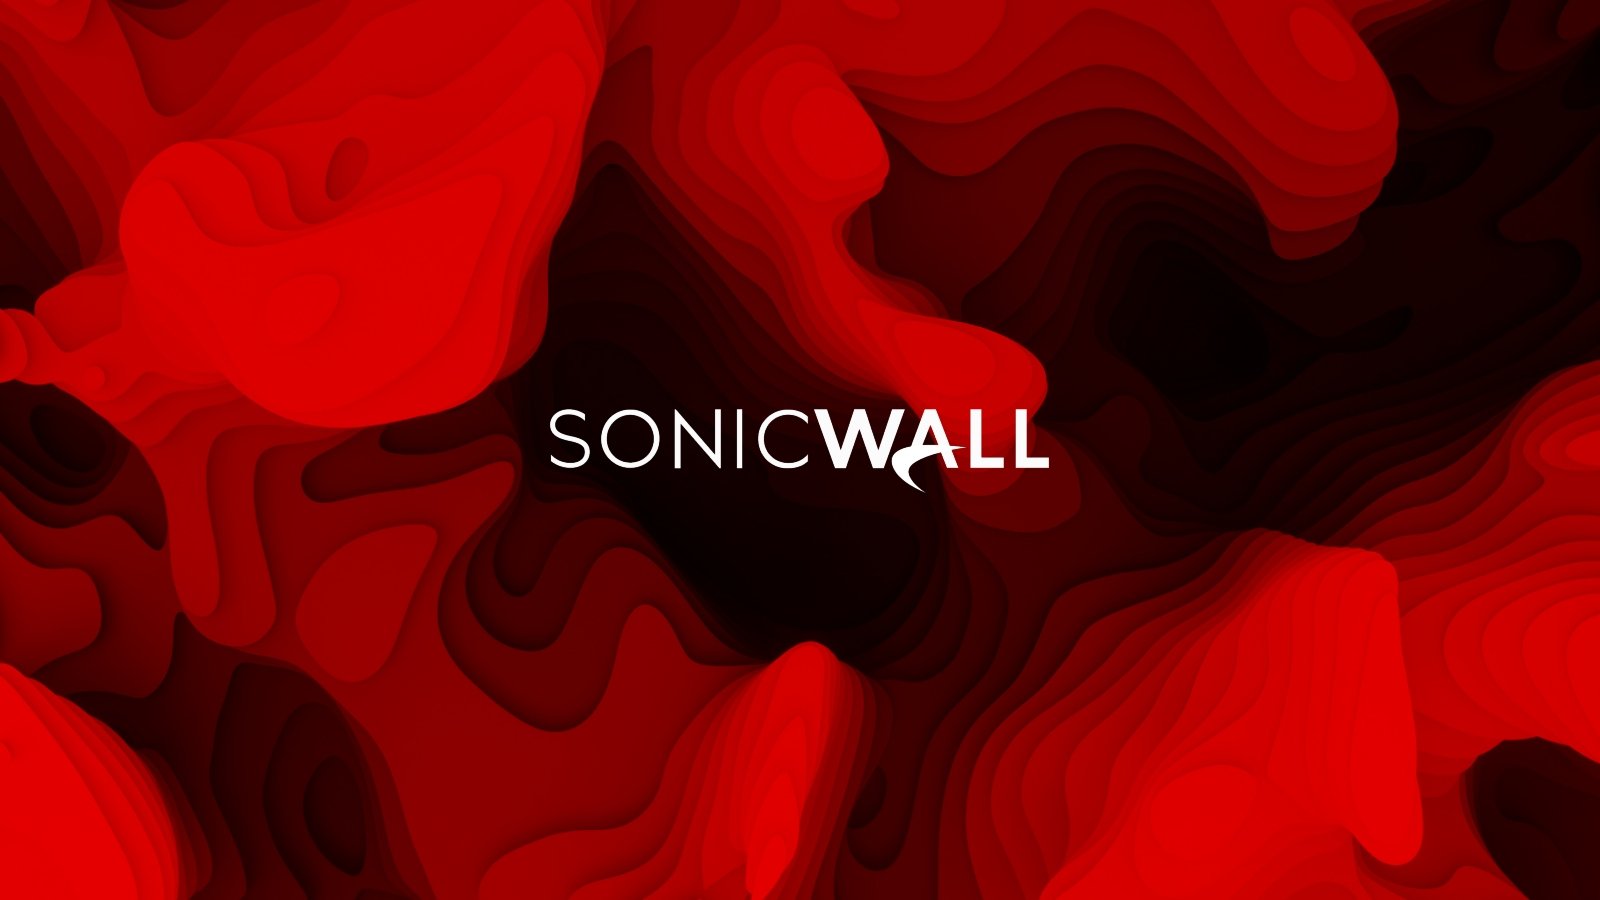 Over 178,000 SonicWall firewalls vulnerable to RCE, DoS attacks